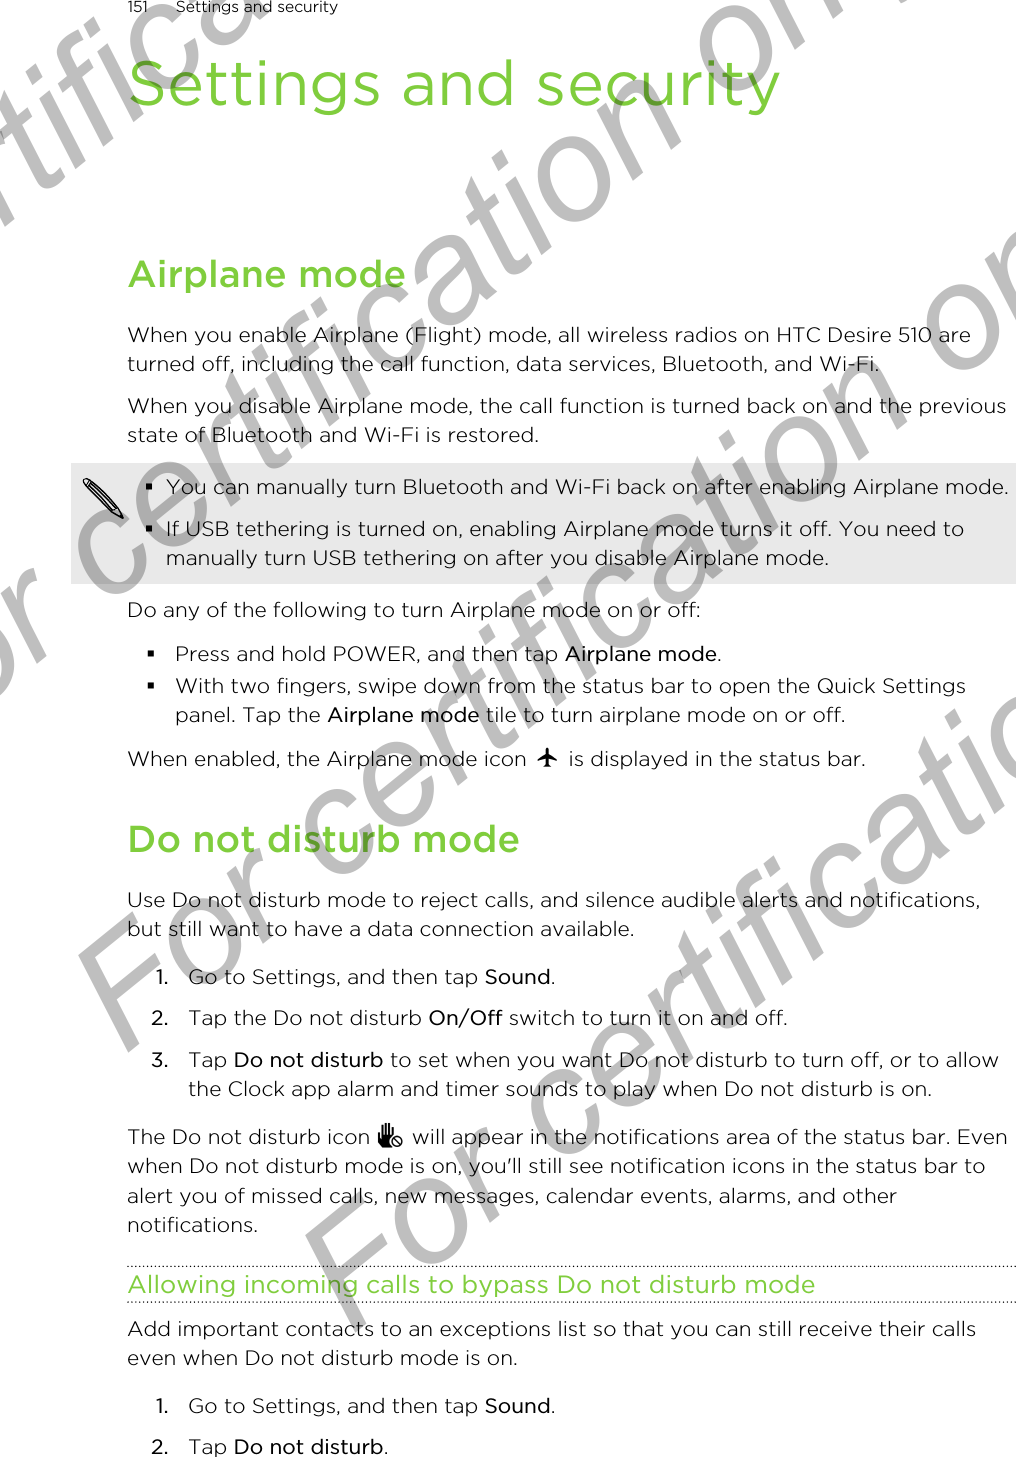 Settings and securityAirplane modeWhen you enable Airplane (Flight) mode, all wireless radios on HTC Desire 510 areturned off, including the call function, data services, Bluetooth, and Wi-Fi.When you disable Airplane mode, the call function is turned back on and the previousstate of Bluetooth and Wi-Fi is restored.§You can manually turn Bluetooth and Wi-Fi back on after enabling Airplane mode.§If USB tethering is turned on, enabling Airplane mode turns it off. You need tomanually turn USB tethering on after you disable Airplane mode.Do any of the following to turn Airplane mode on or off:§Press and hold POWER, and then tap Airplane mode.§With two fingers, swipe down from the status bar to open the Quick Settingspanel. Tap the Airplane mode tile to turn airplane mode on or off.When enabled, the Airplane mode icon   is displayed in the status bar.Do not disturb modeUse Do not disturb mode to reject calls, and silence audible alerts and notifications,but still want to have a data connection available.1. Go to Settings, and then tap Sound.2. Tap the Do not disturb On/Off switch to turn it on and off.3. Tap Do not disturb to set when you want Do not disturb to turn off, or to allowthe Clock app alarm and timer sounds to play when Do not disturb is on.The Do not disturb icon   will appear in the notifications area of the status bar. Evenwhen Do not disturb mode is on, you&apos;ll still see notification icons in the status bar toalert you of missed calls, new messages, calendar events, alarms, and othernotifications.Allowing incoming calls to bypass Do not disturb modeAdd important contacts to an exceptions list so that you can still receive their callseven when Do not disturb mode is on.1. Go to Settings, and then tap Sound.2. Tap Do not disturb.151 Settings and securityFor certification only  For certification only  For certification only  For certification only 